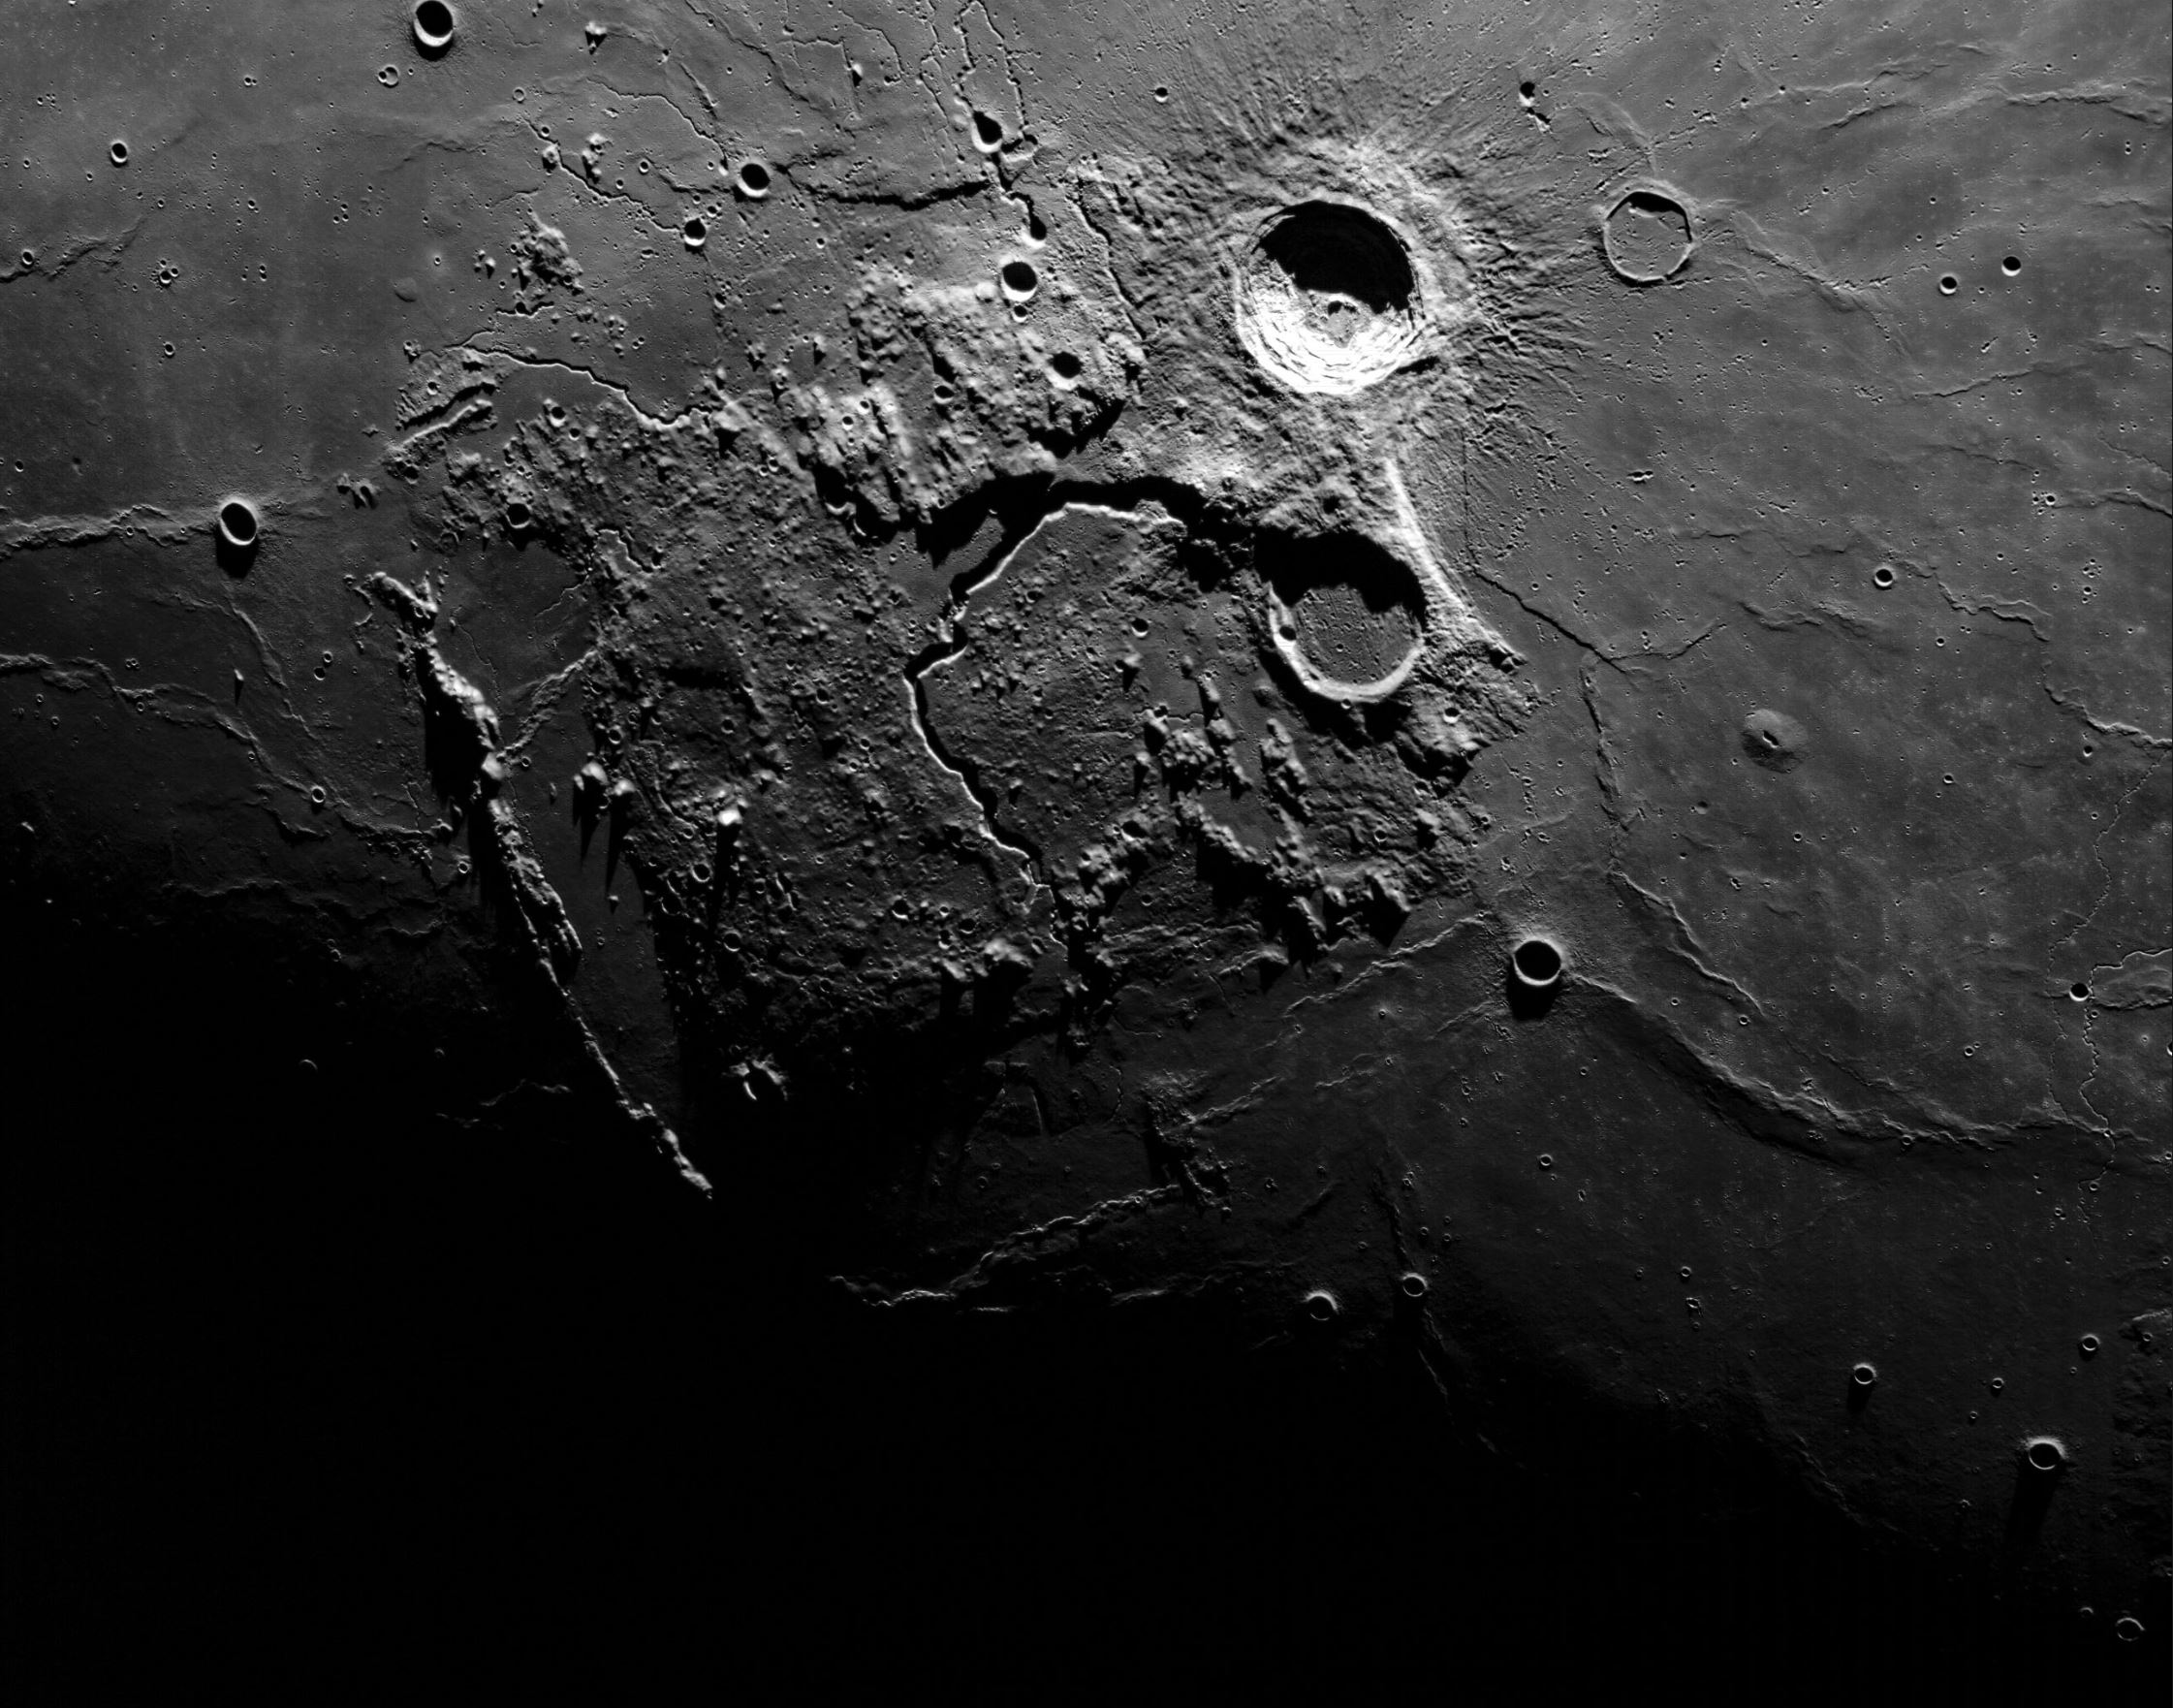 A stunning close-up view of the lunar surface taken by the Artemis I mission. Image Credit: Orion/Artemis I, NASA.